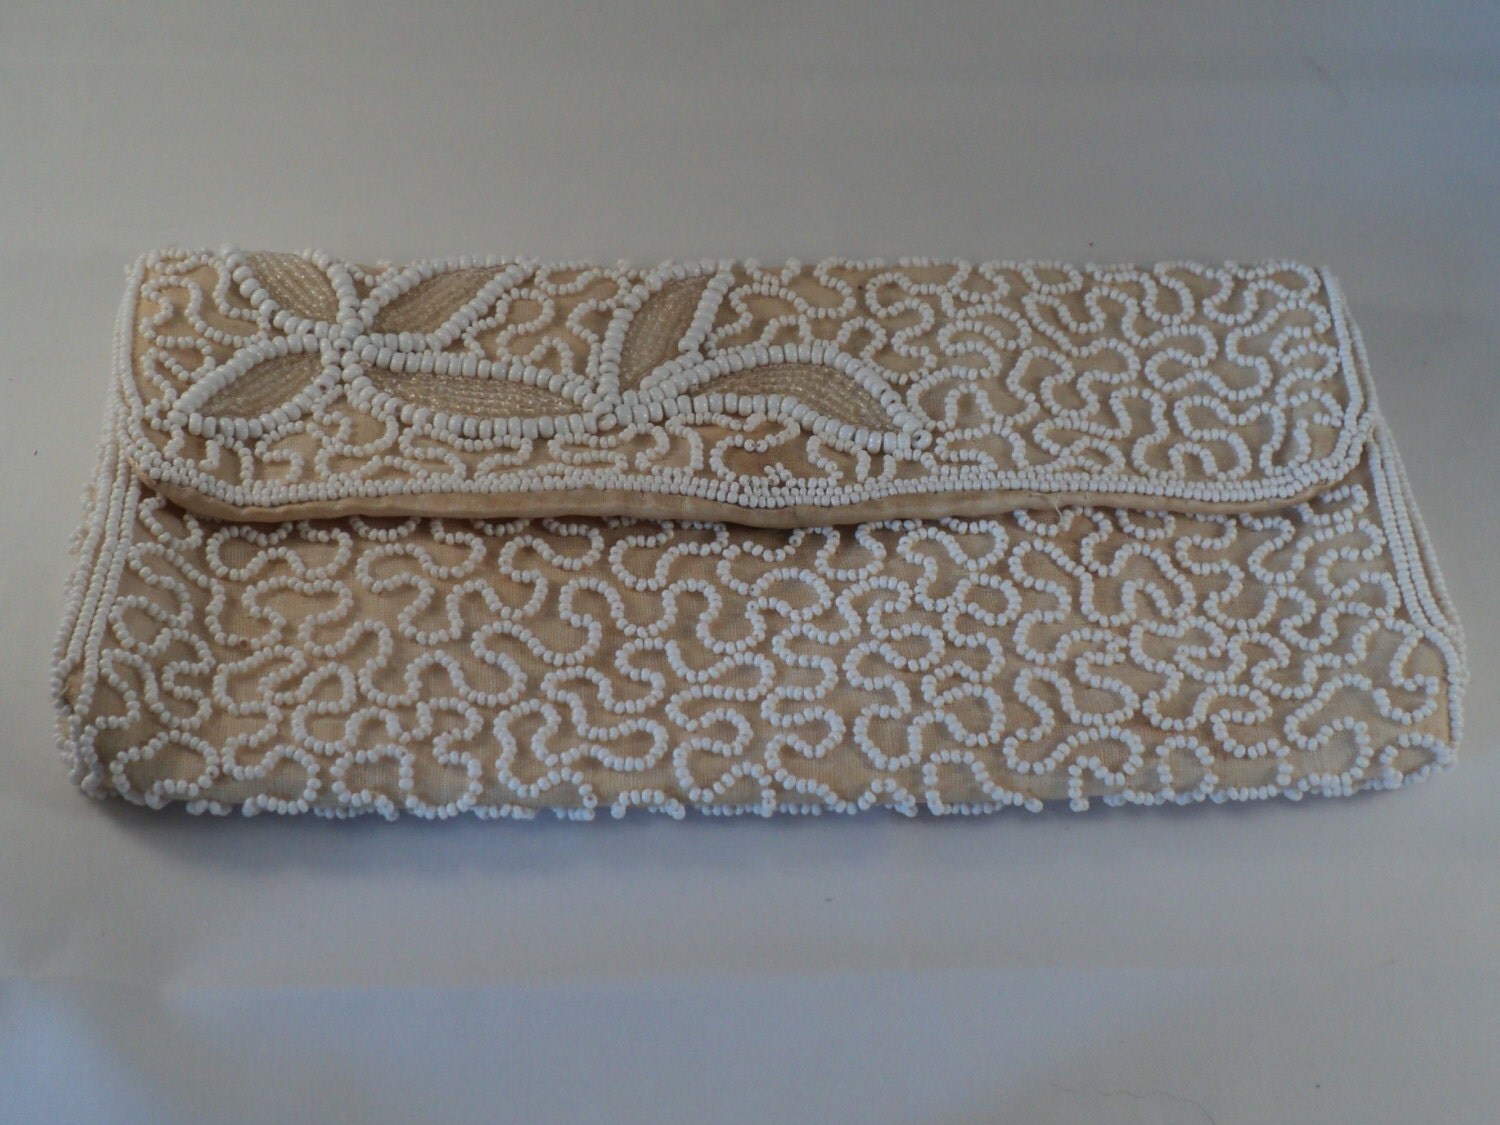 Beaded Clutch Purse Vintage White Beaded